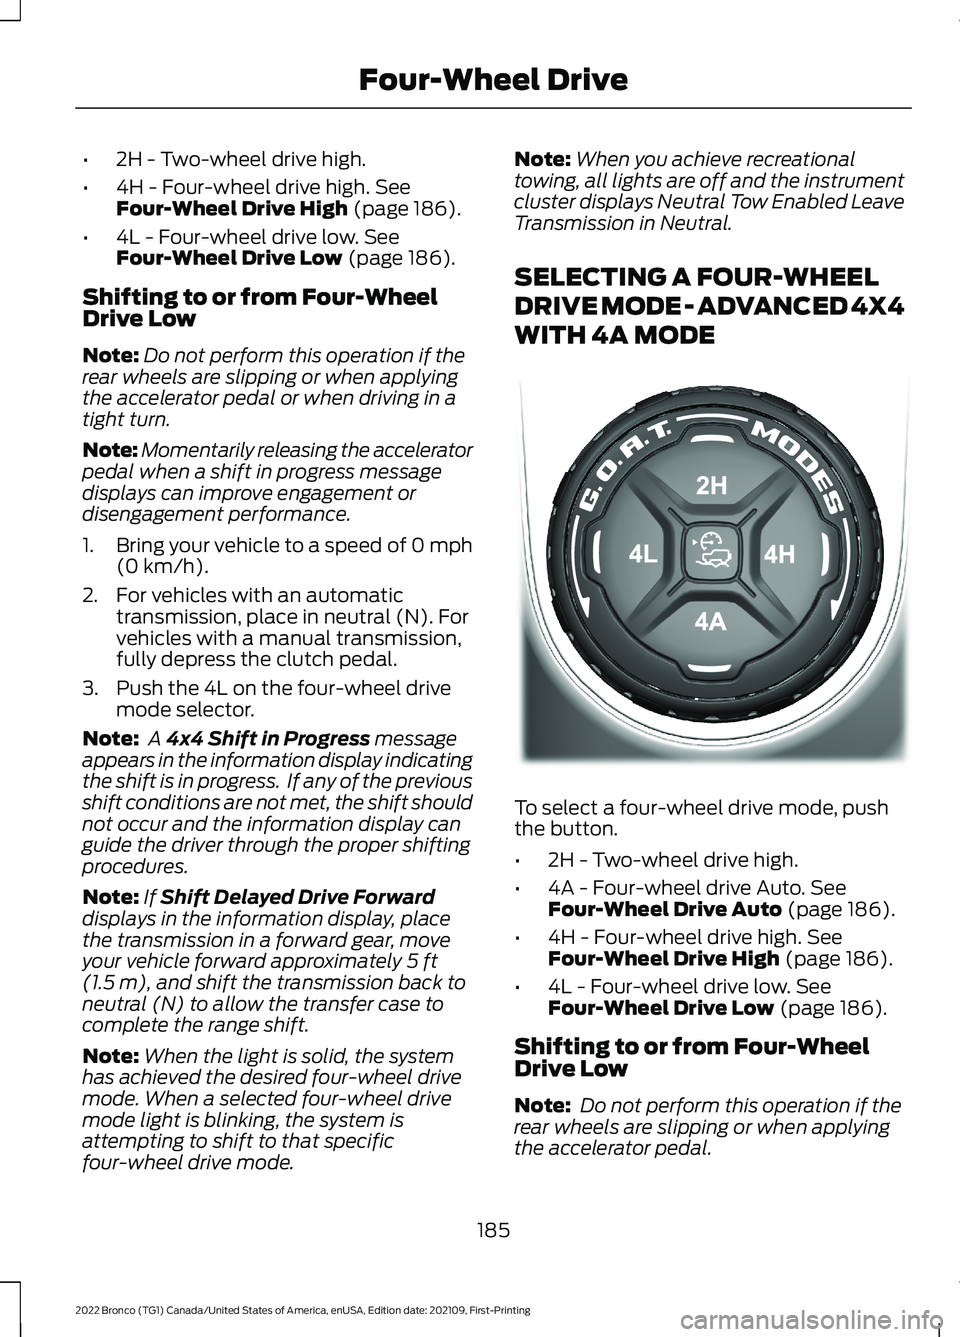 FORD BRONCO 2022 User Guide •2H - Two-wheel drive high.
•4H - Four-wheel drive high. SeeFour-Wheel Drive High (page 186).
•4L - Four-wheel drive low. SeeFour-Wheel Drive Low (page 186).
Shifting to or from Four-WheelDrive 